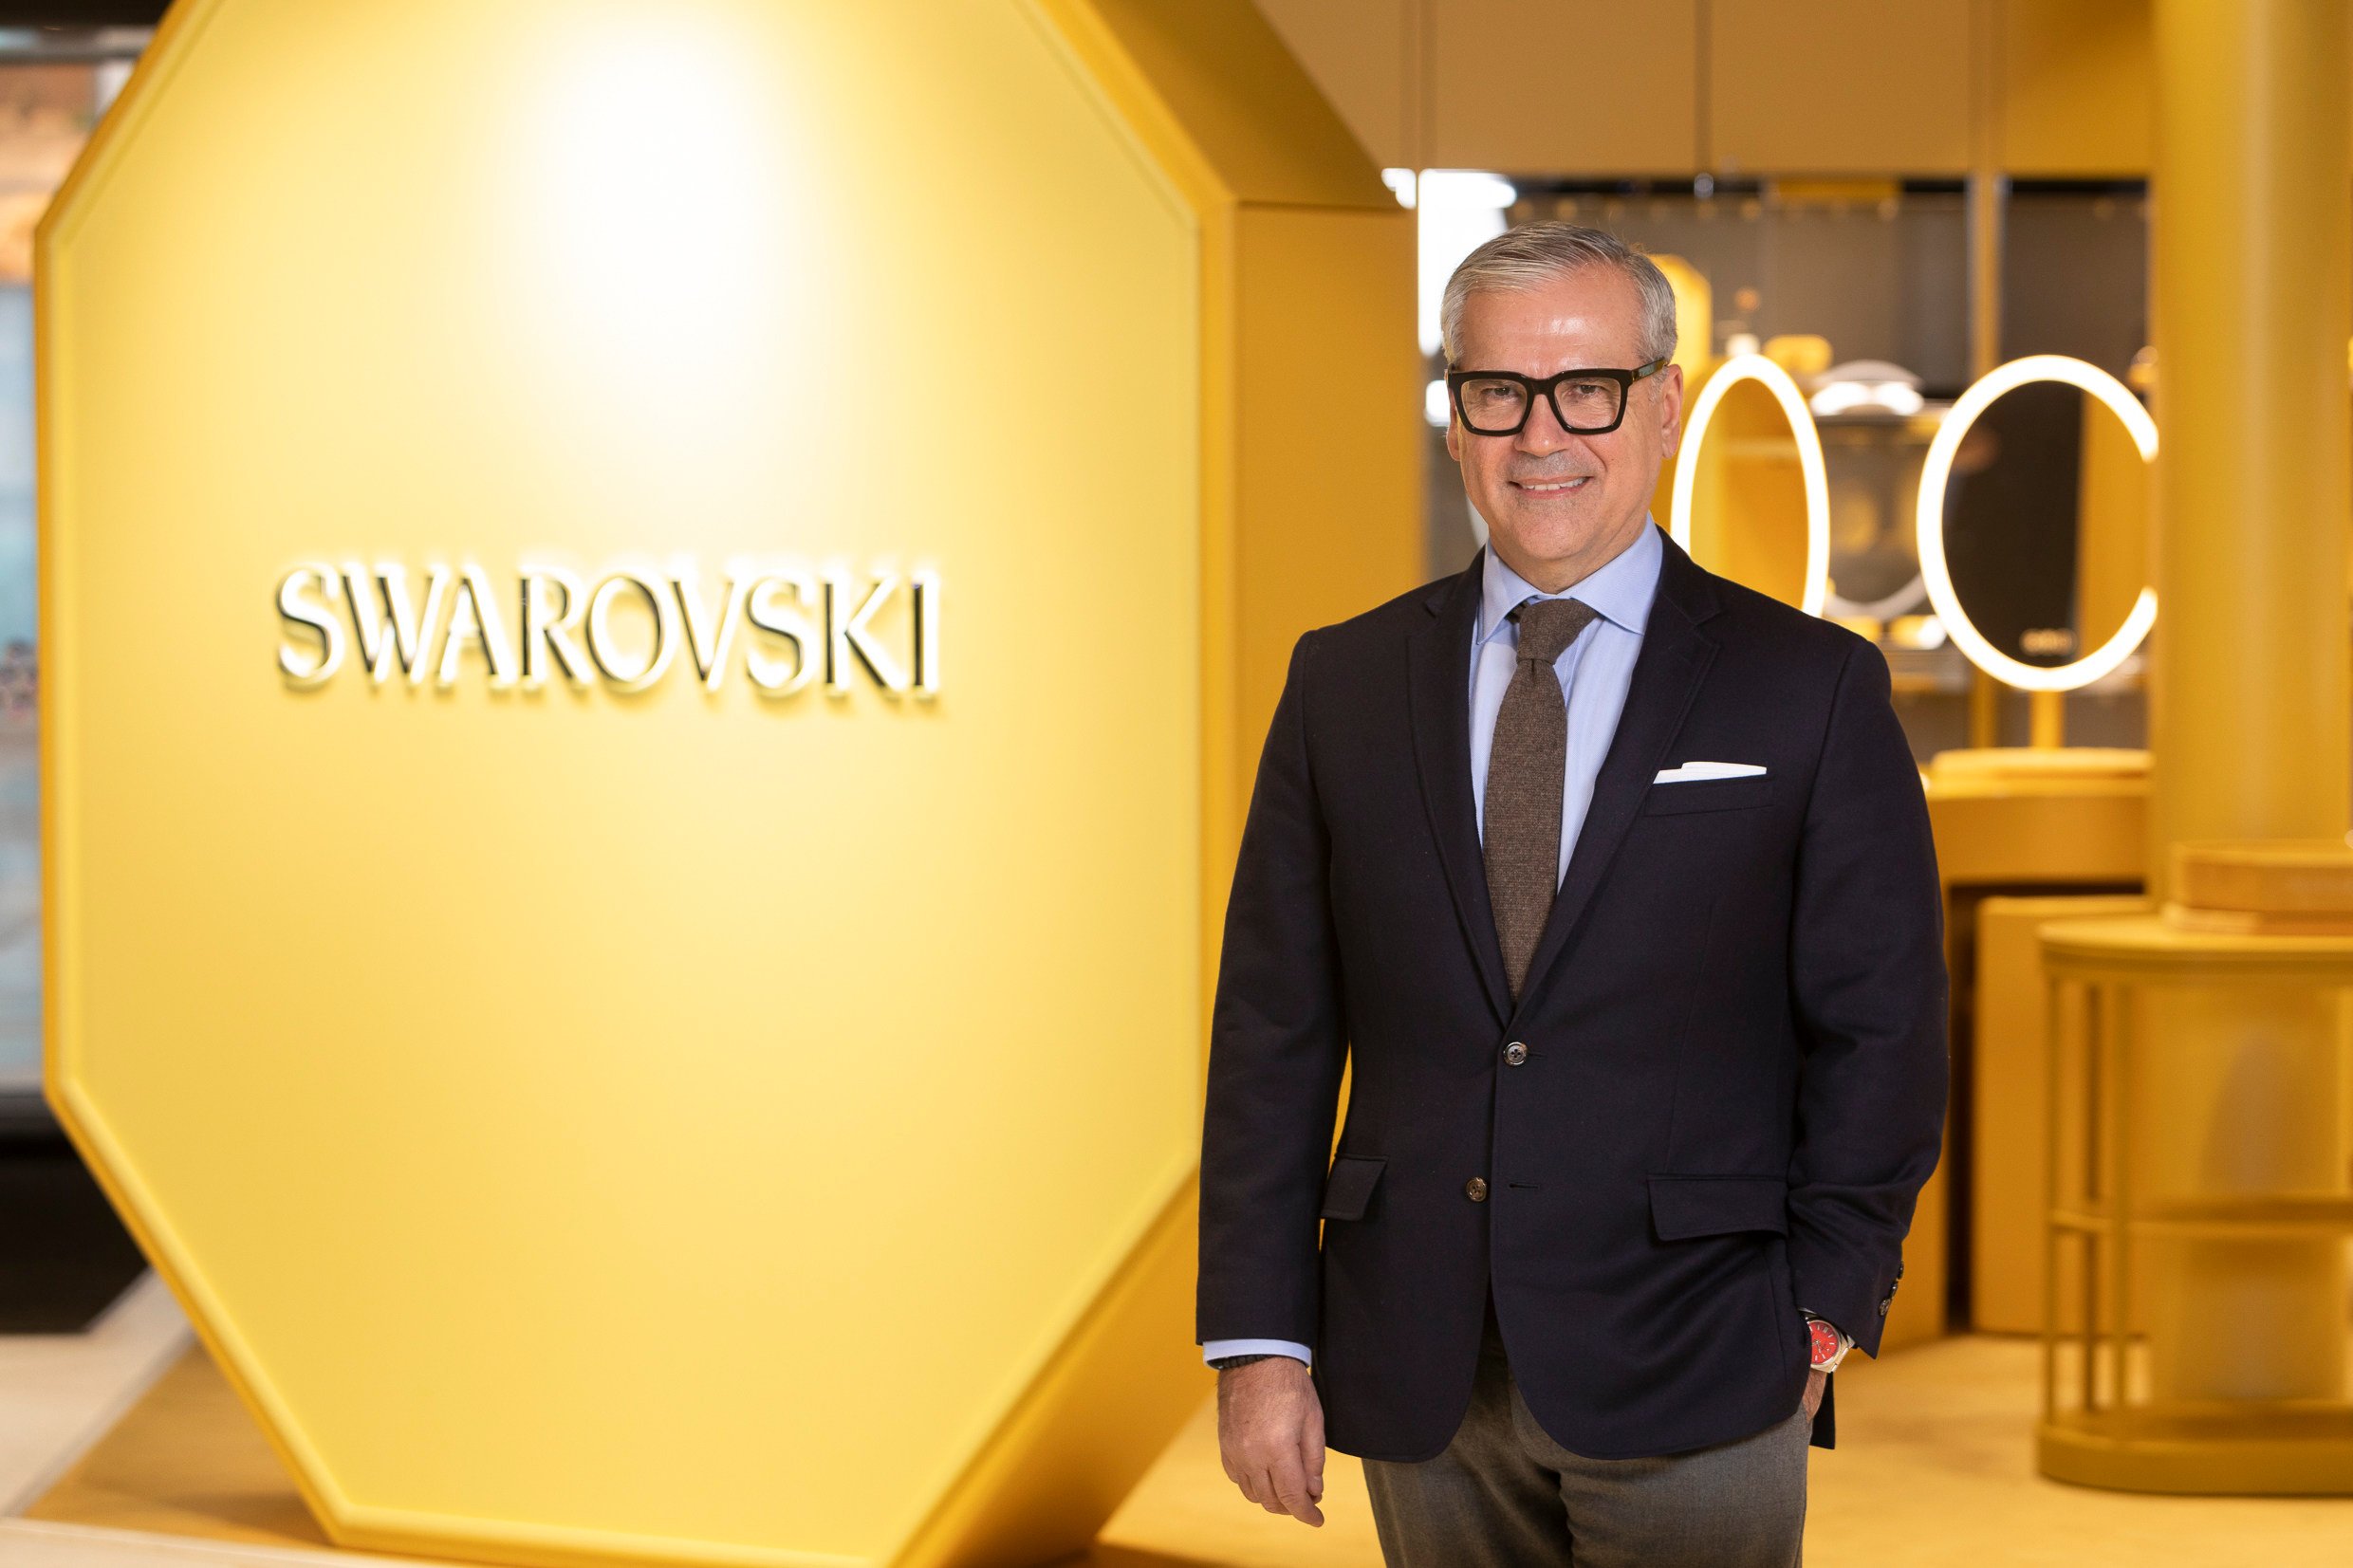 ‘China is a very important market for us – for business, economic and cultural reasons,’ Swarovski CEO Alexis Nasard says. Photo: Handout